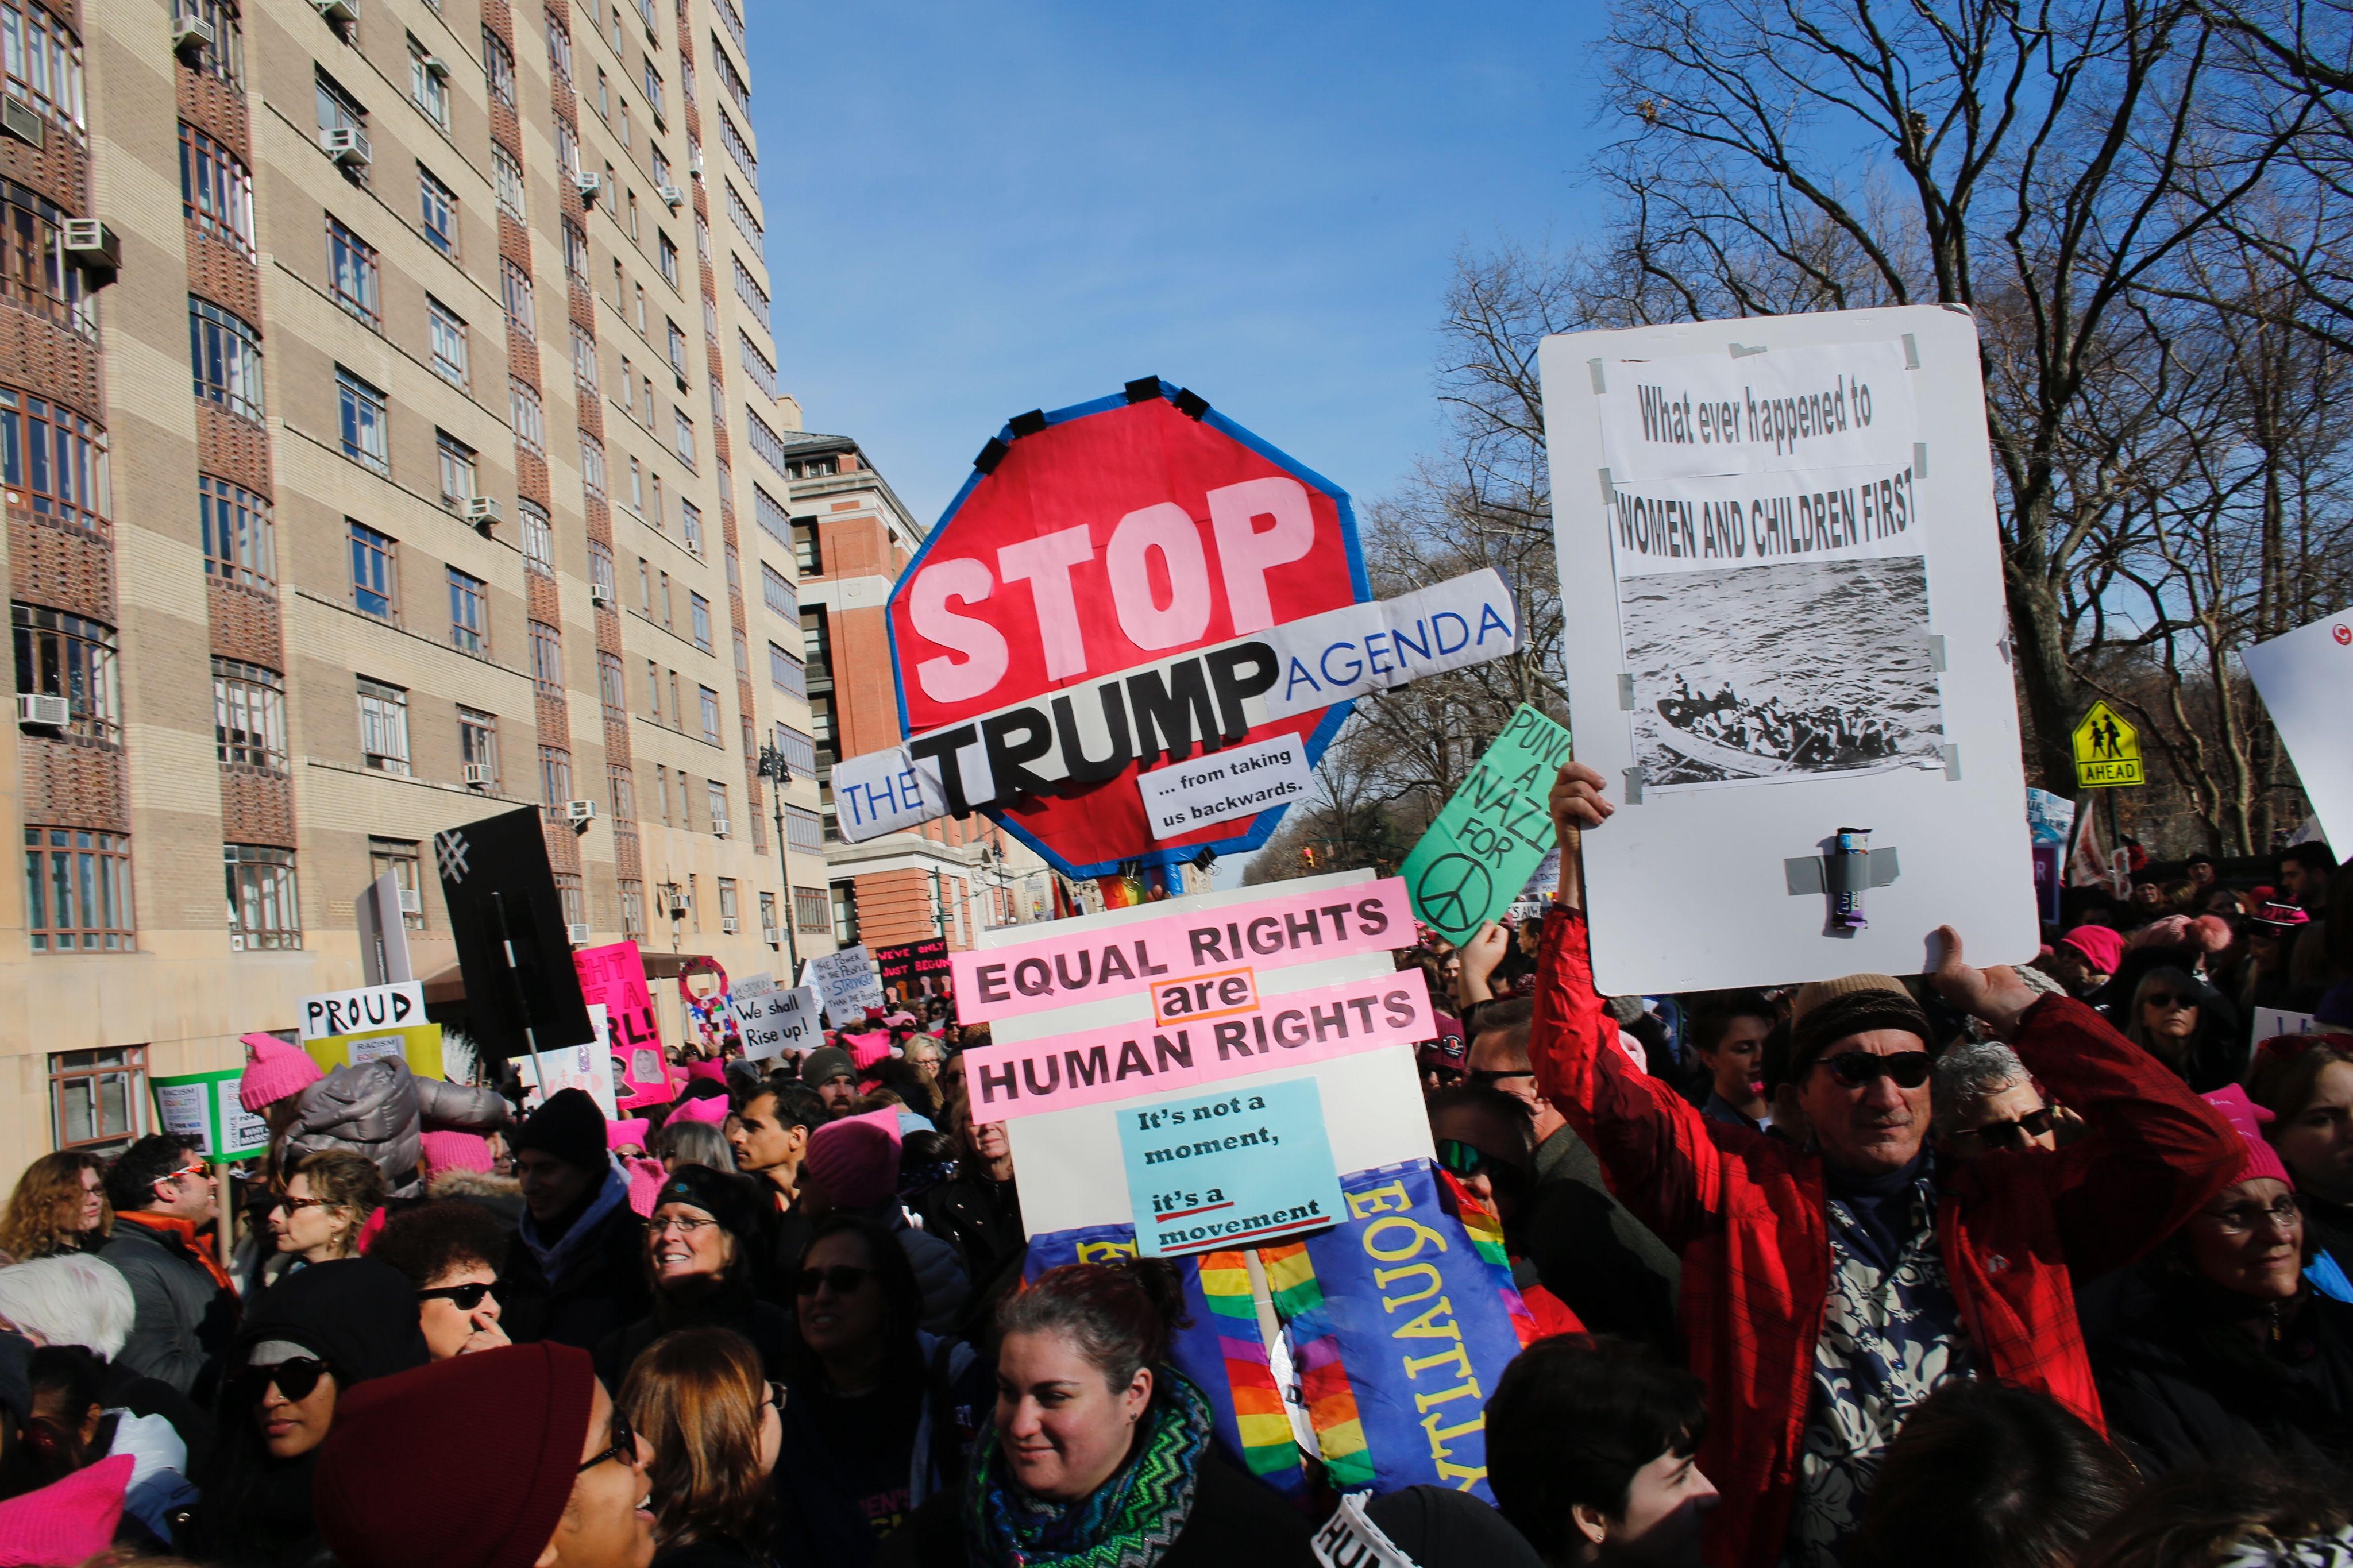 Women’s March NYC Crowd Size How Many Attended? [PHOTOS]